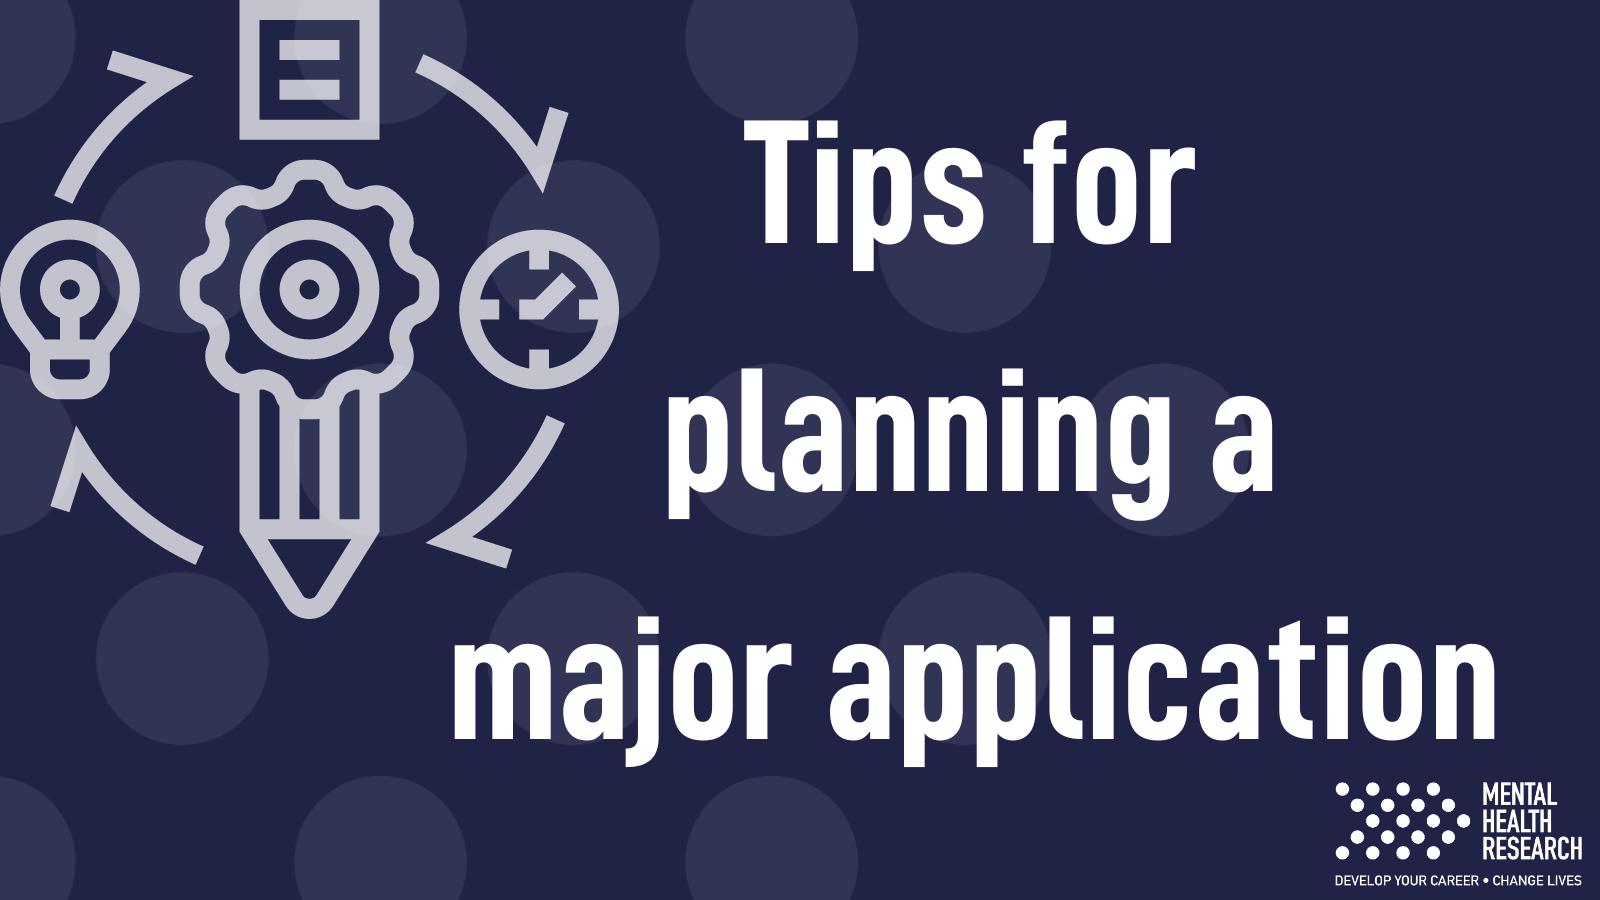 Tips for planning a major application